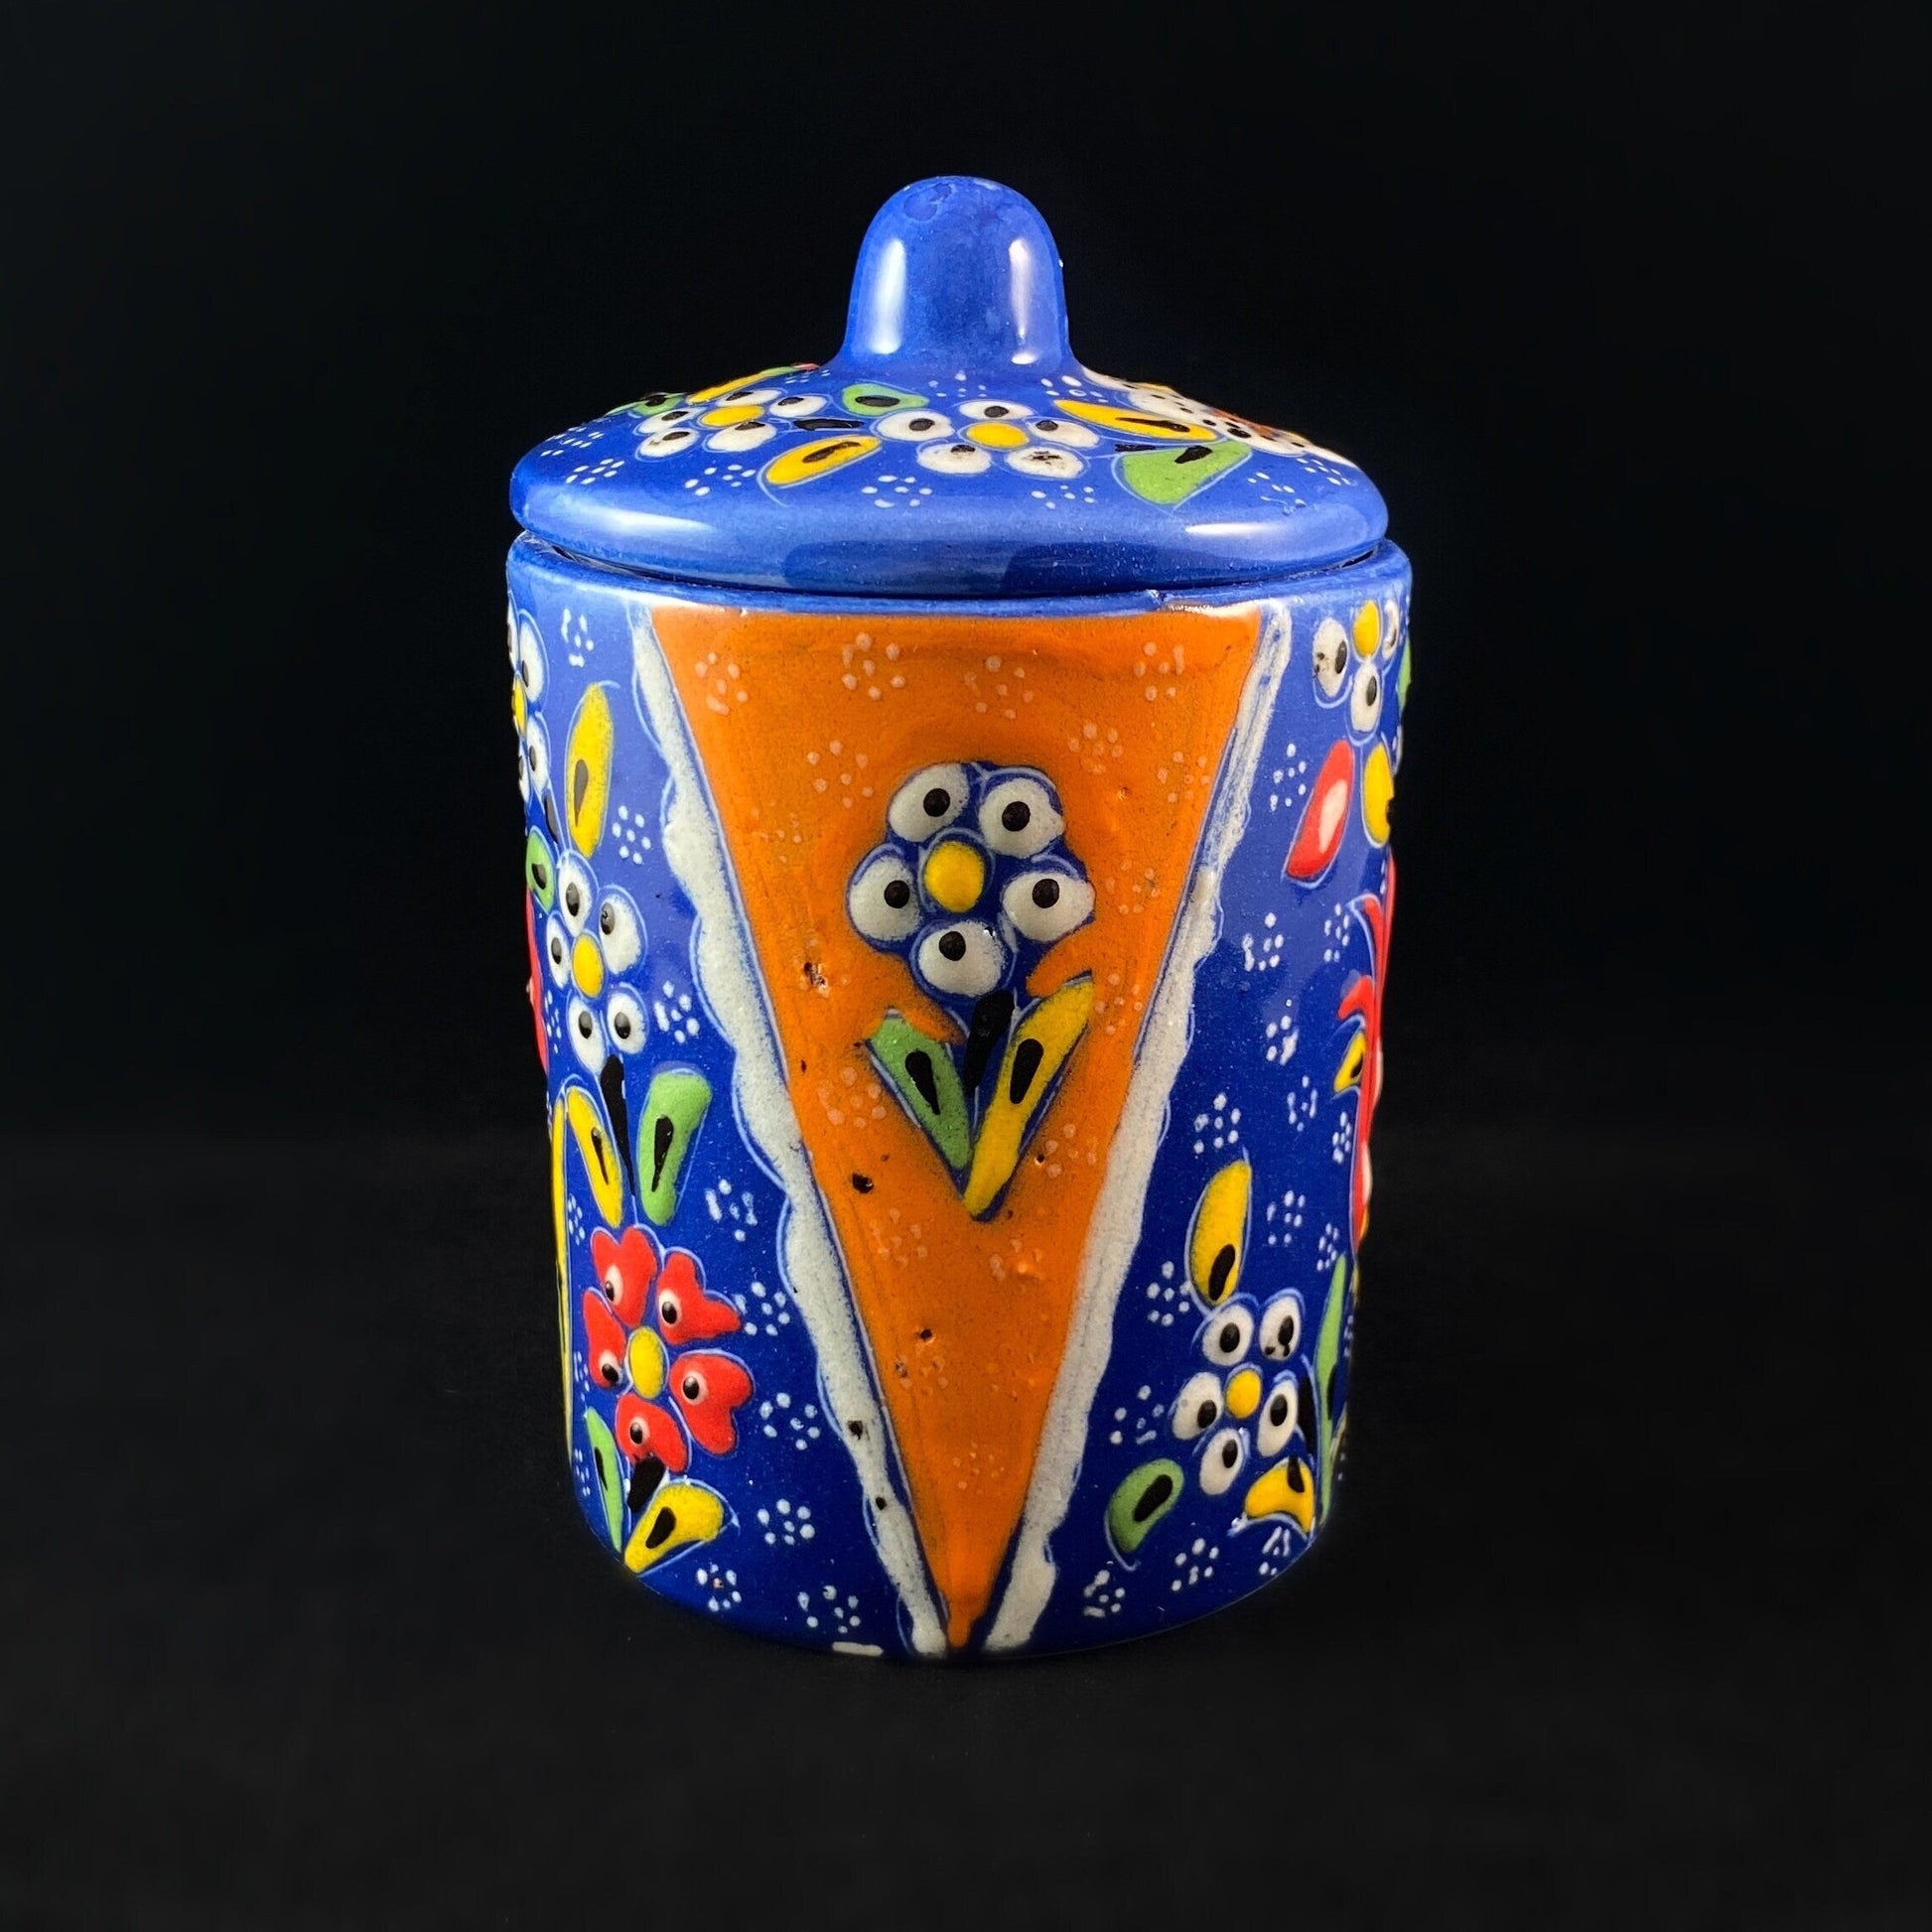 Handmade Canister with Top, Functional and Decorative Turkish Pottery, Cottagecore Style, Blue